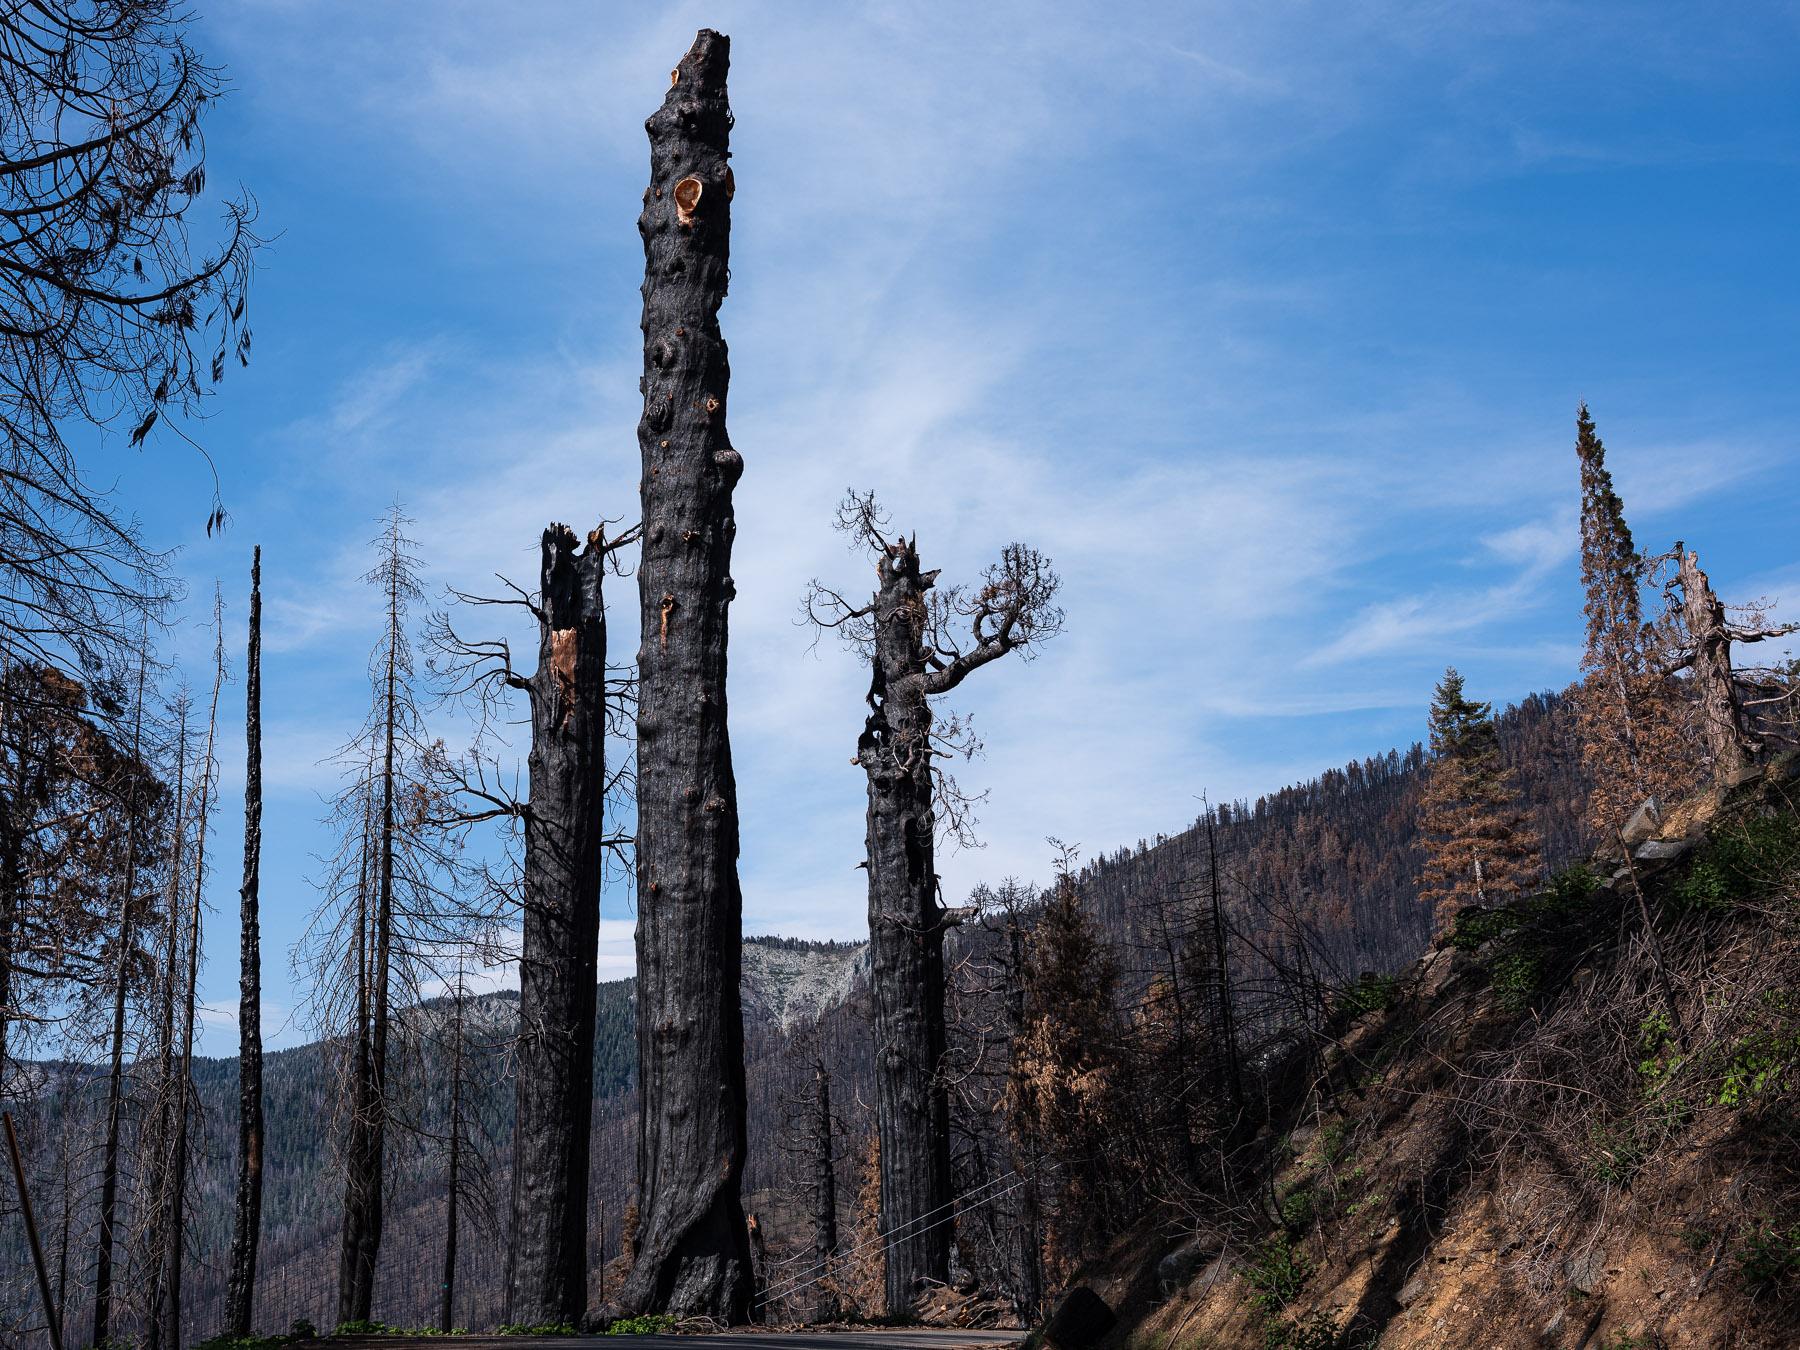 - Sequoia, a year in a burning forest - Overcome by hotter fires The scorched remnants of...